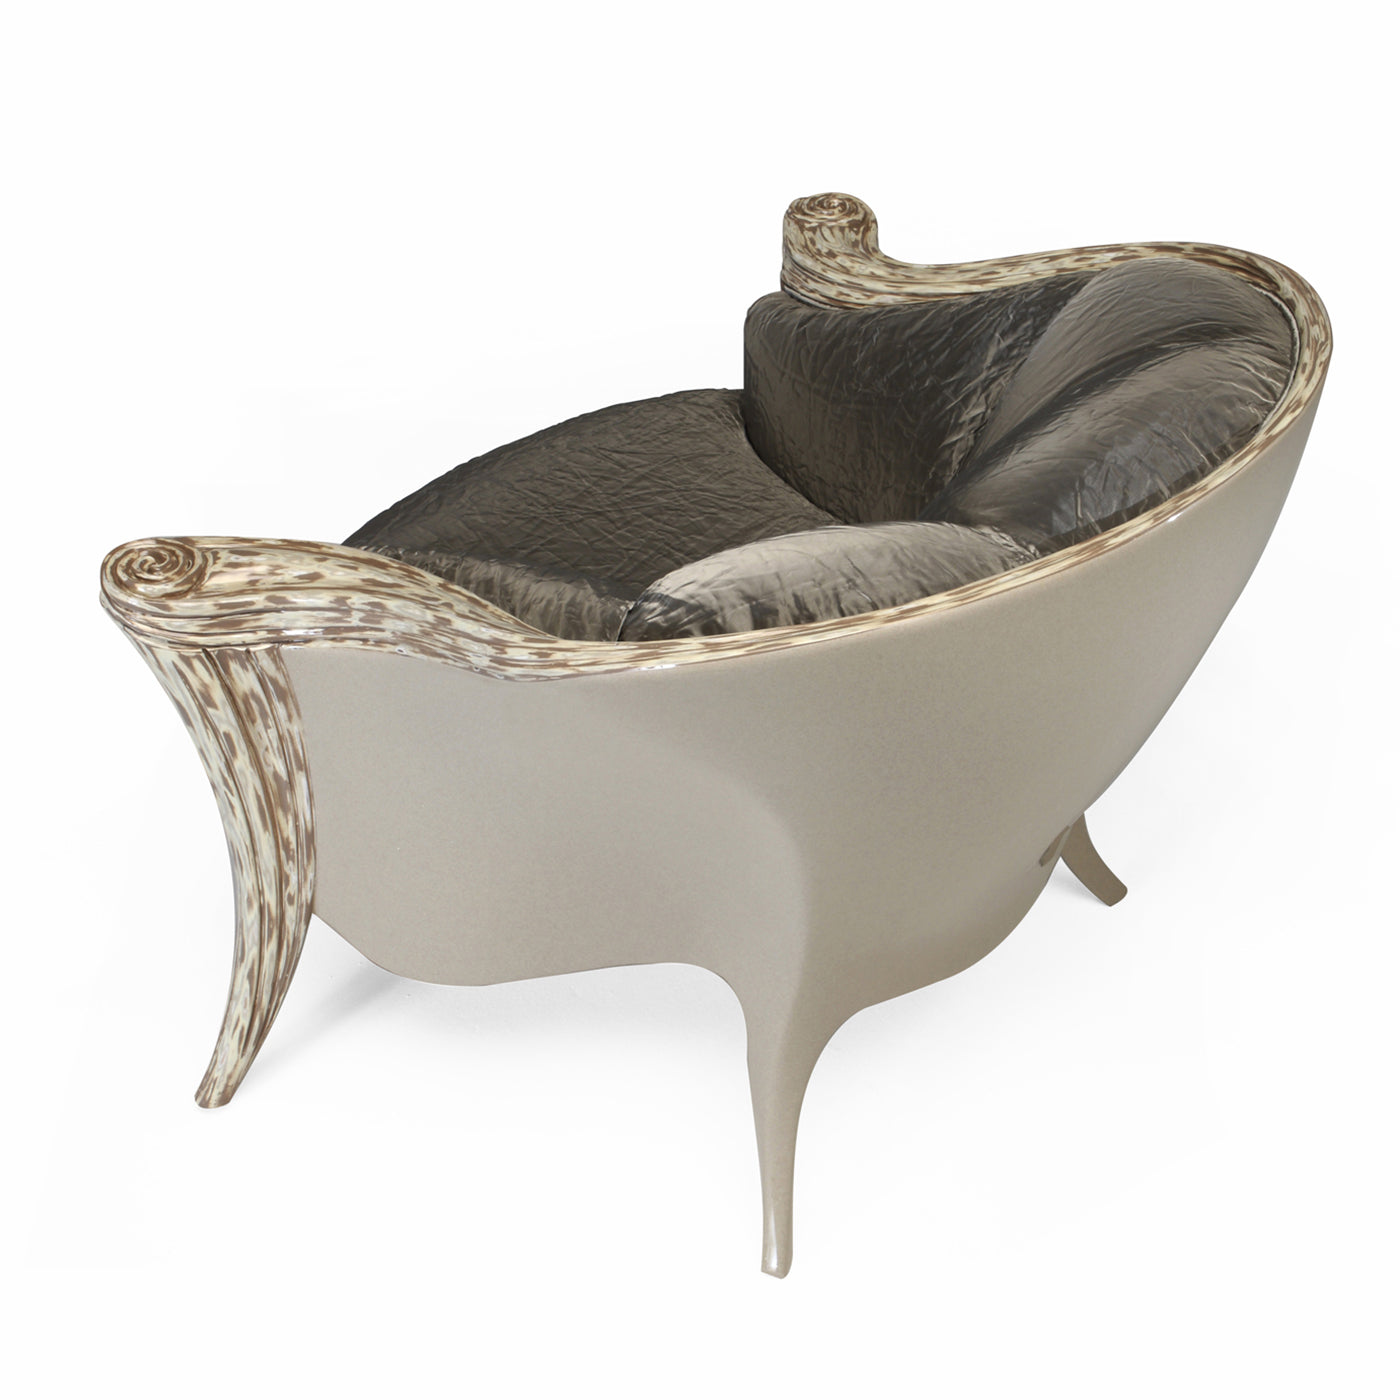 Opus Futura Upholstered Armchair Gray by Carlo Rampazzi - Alternative view 1